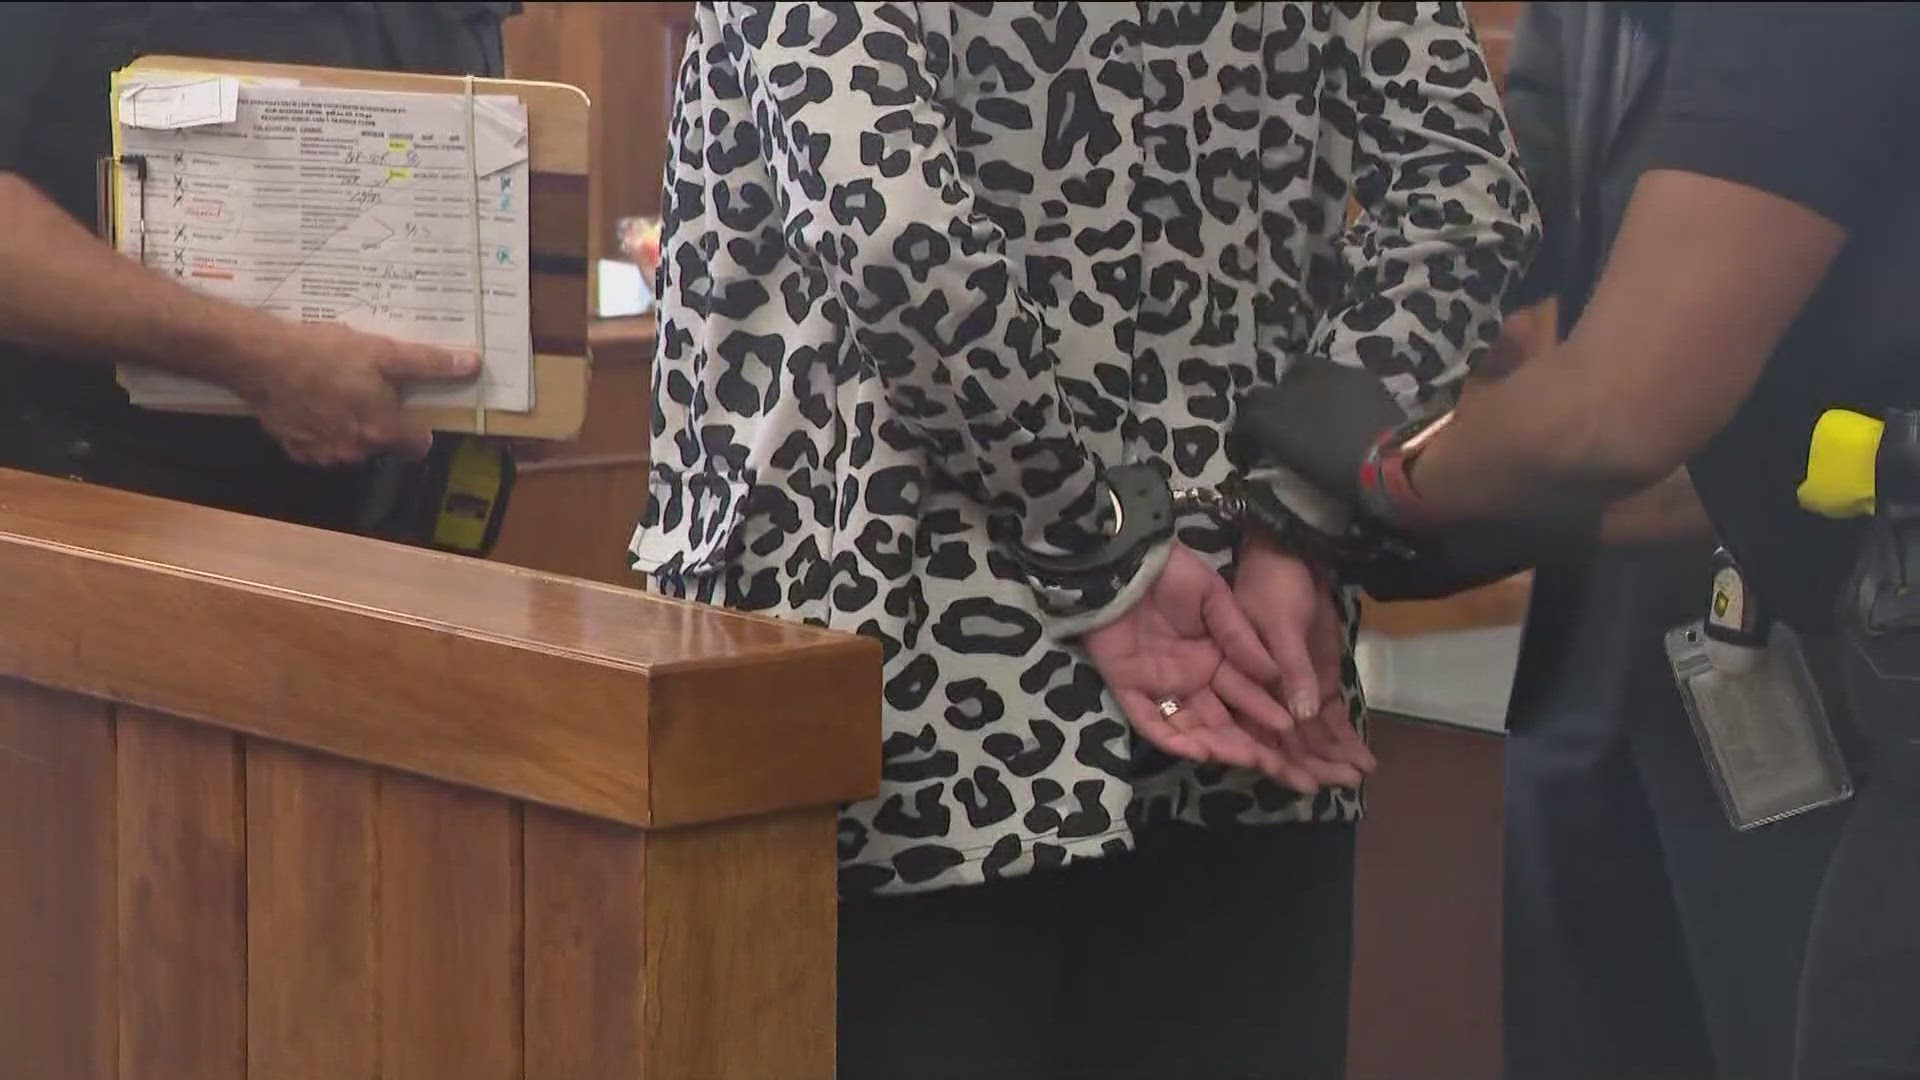 Lisa Titkemeier is accused of lying about having cancer to garner donations from the community. She appeared in court Thursday; the case is continued to May 30.